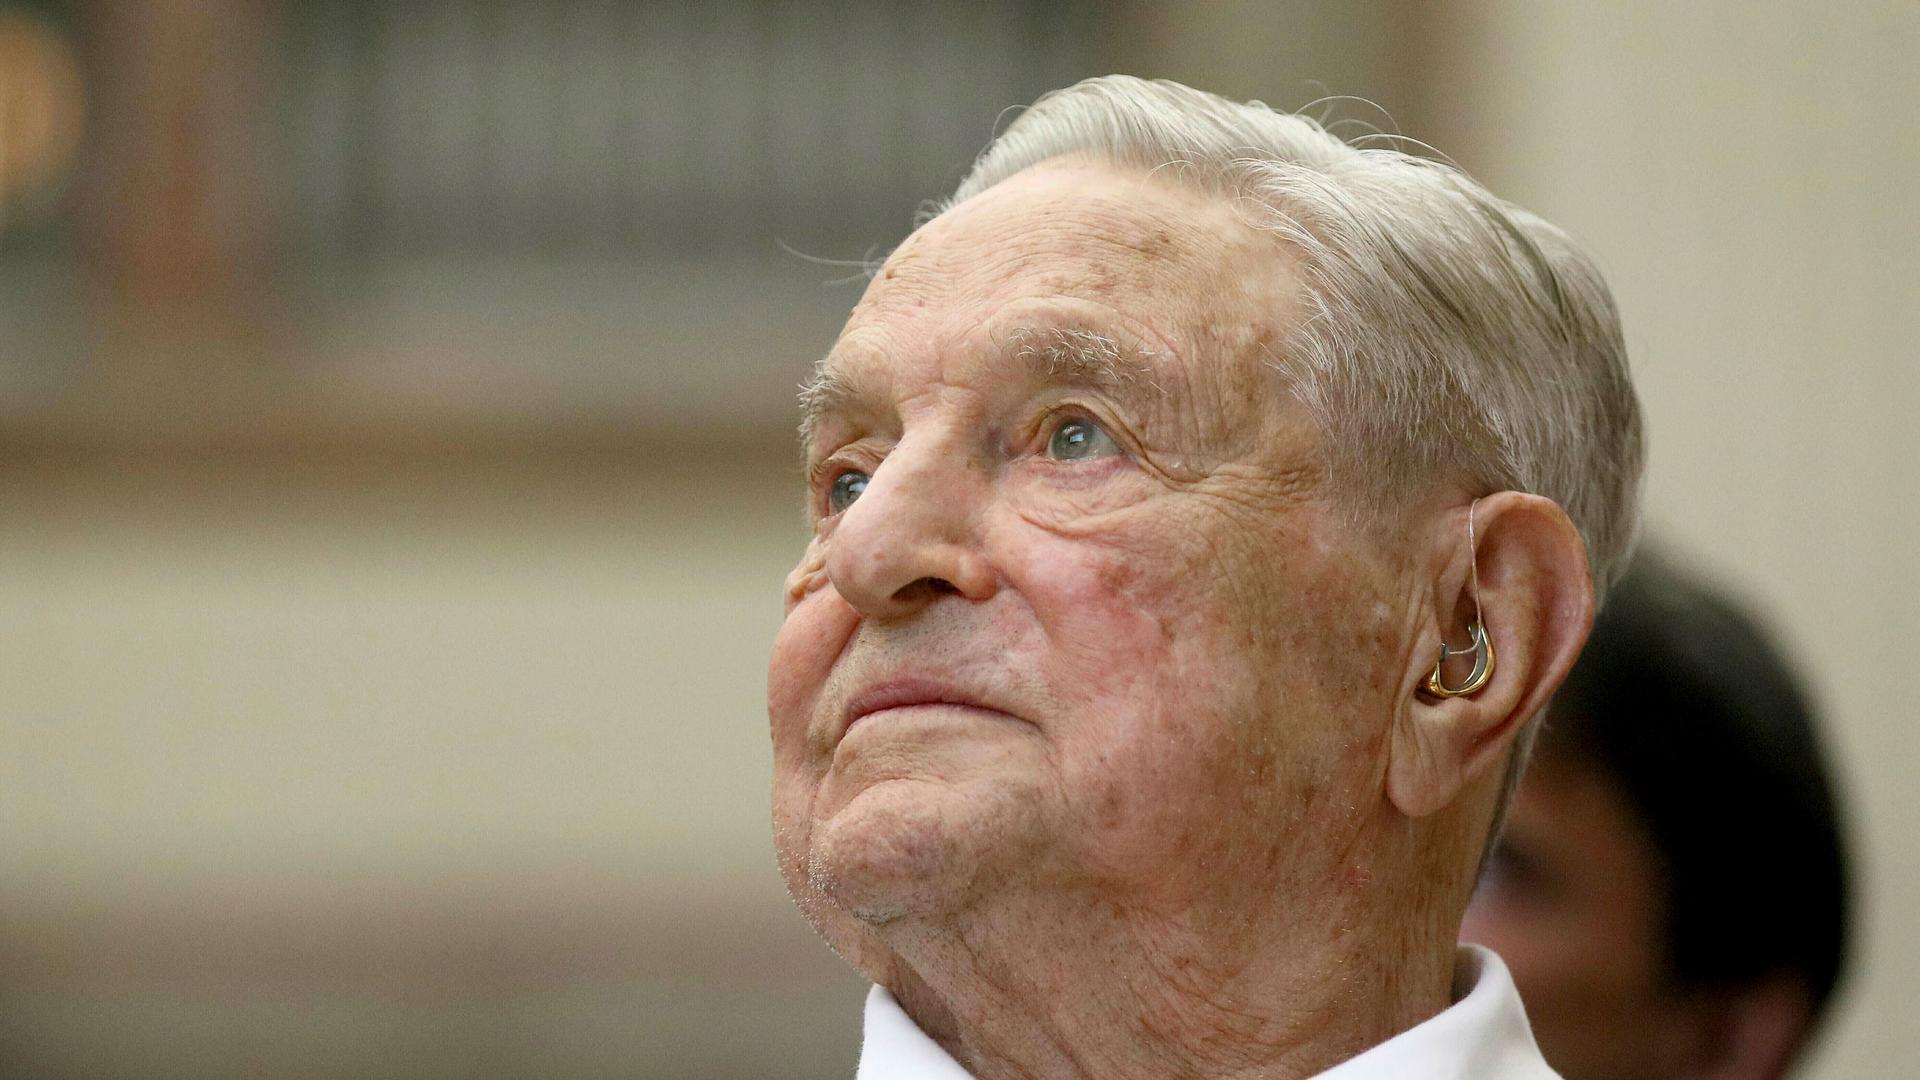 In this June 21, 2019, file photo, George Soros, founder and chairman of the Open Society Foundations, looks before the Joseph A. Schumpeter award ceremony in Vienna, Austria. 